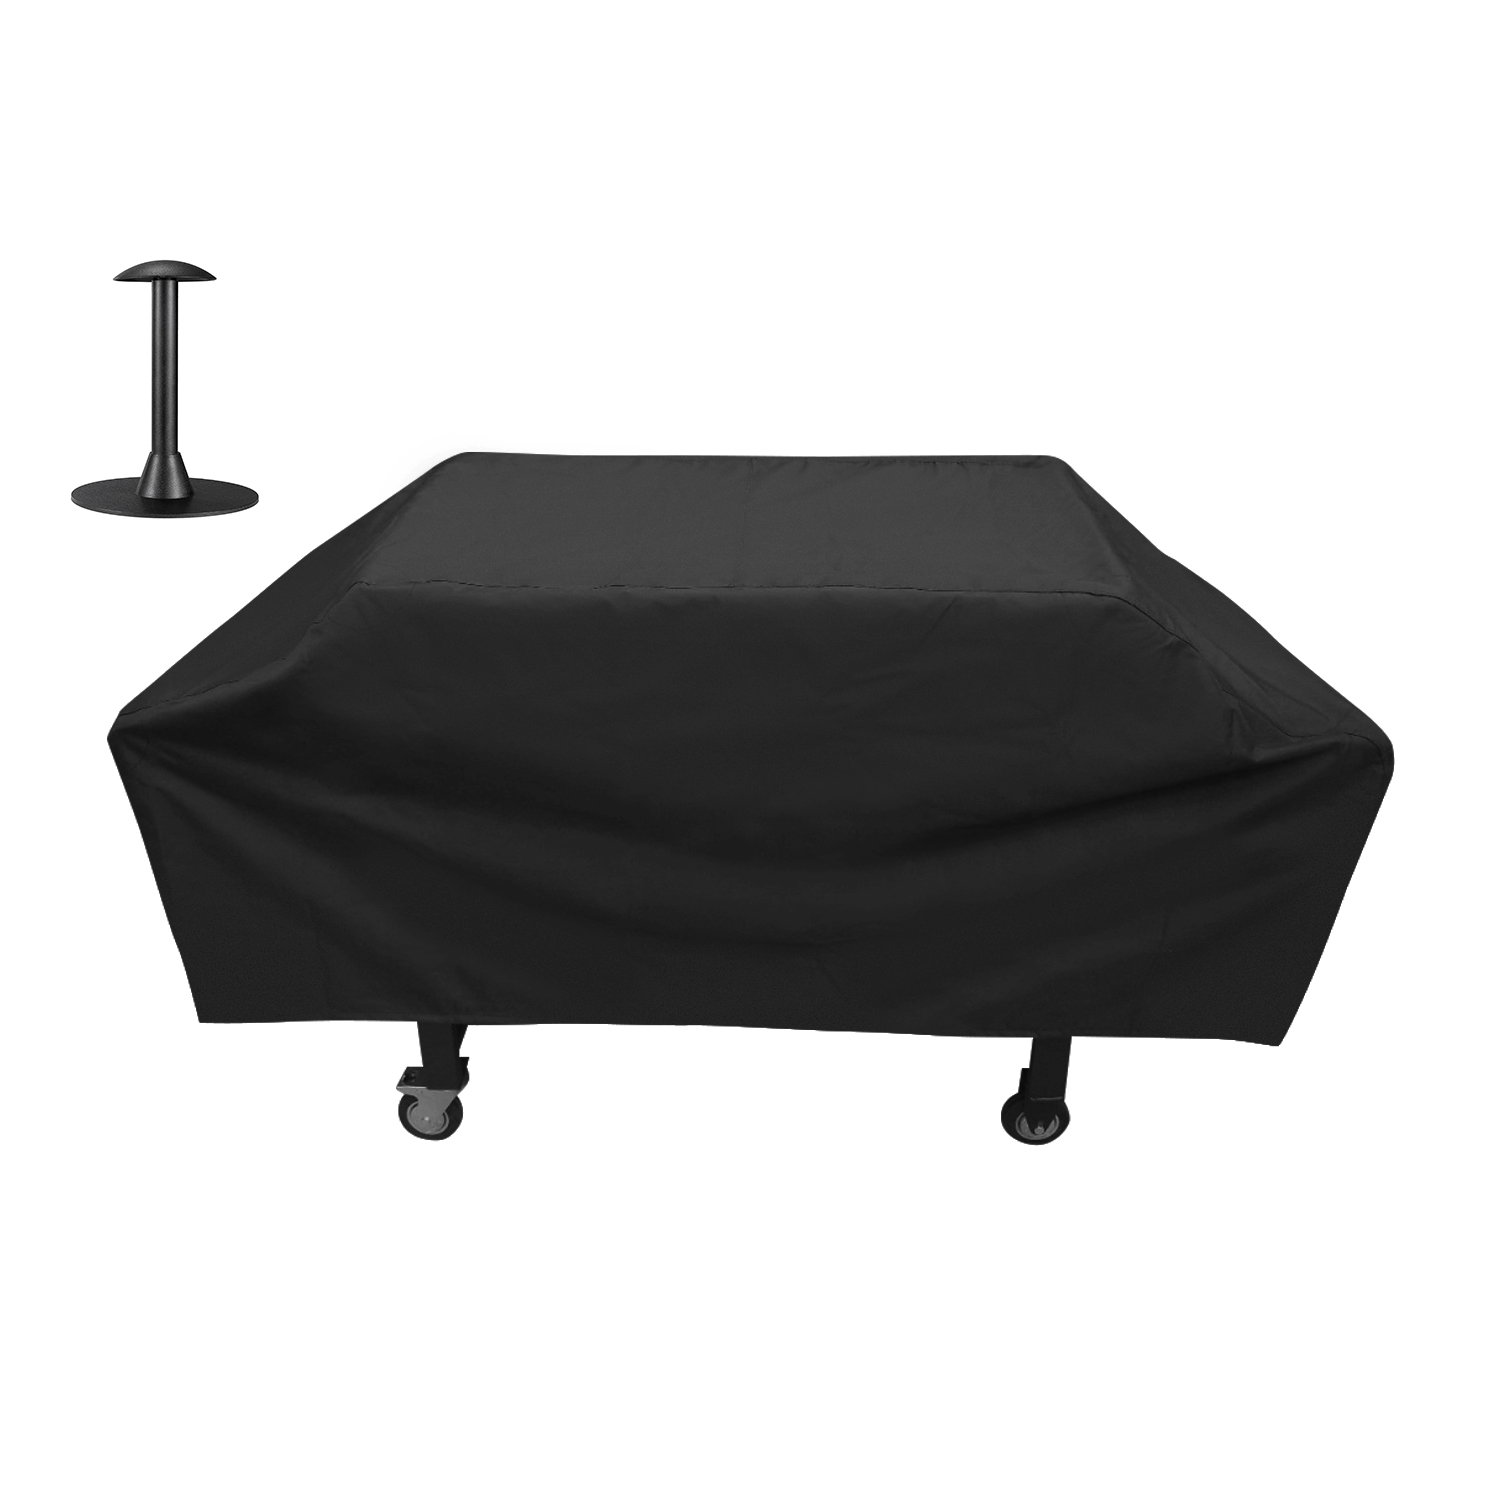 Unicook Griddle Cover for Blackstone 36 Inch ProSeries Grill Heavy Duty Waterproof Large Grill Cover 75 Inch Includes Support Pole Flat Top Cooking Station Cover with Sealed Seam